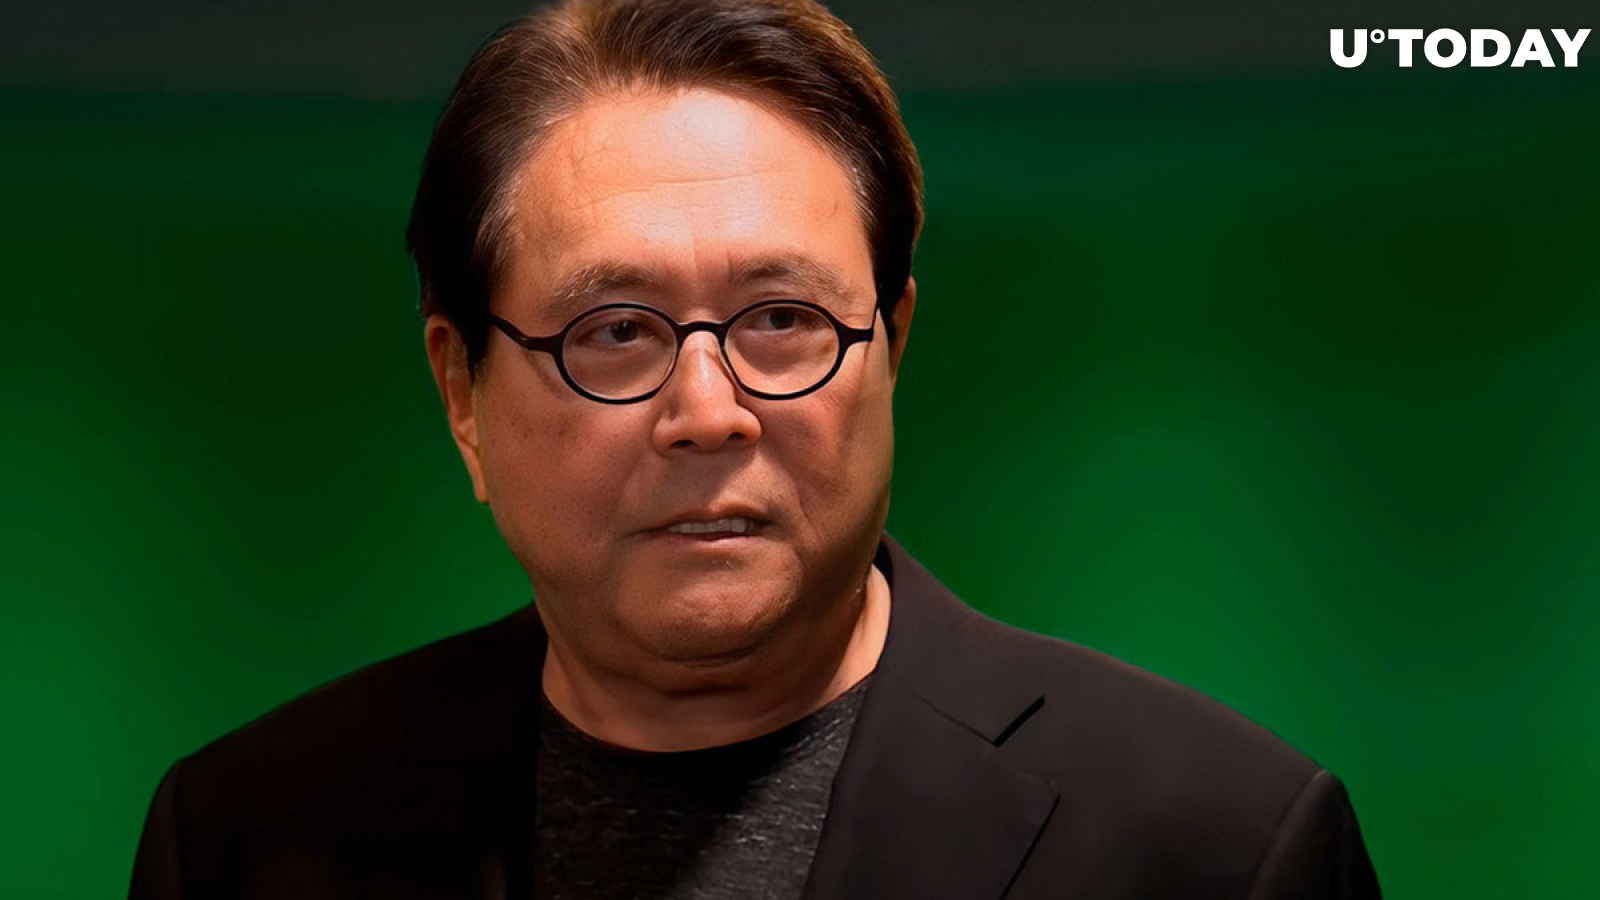 "Rich Dad, Poor Dad" Author Kiyosaki Urges Followers to Get into Crypto Before Markets Crash